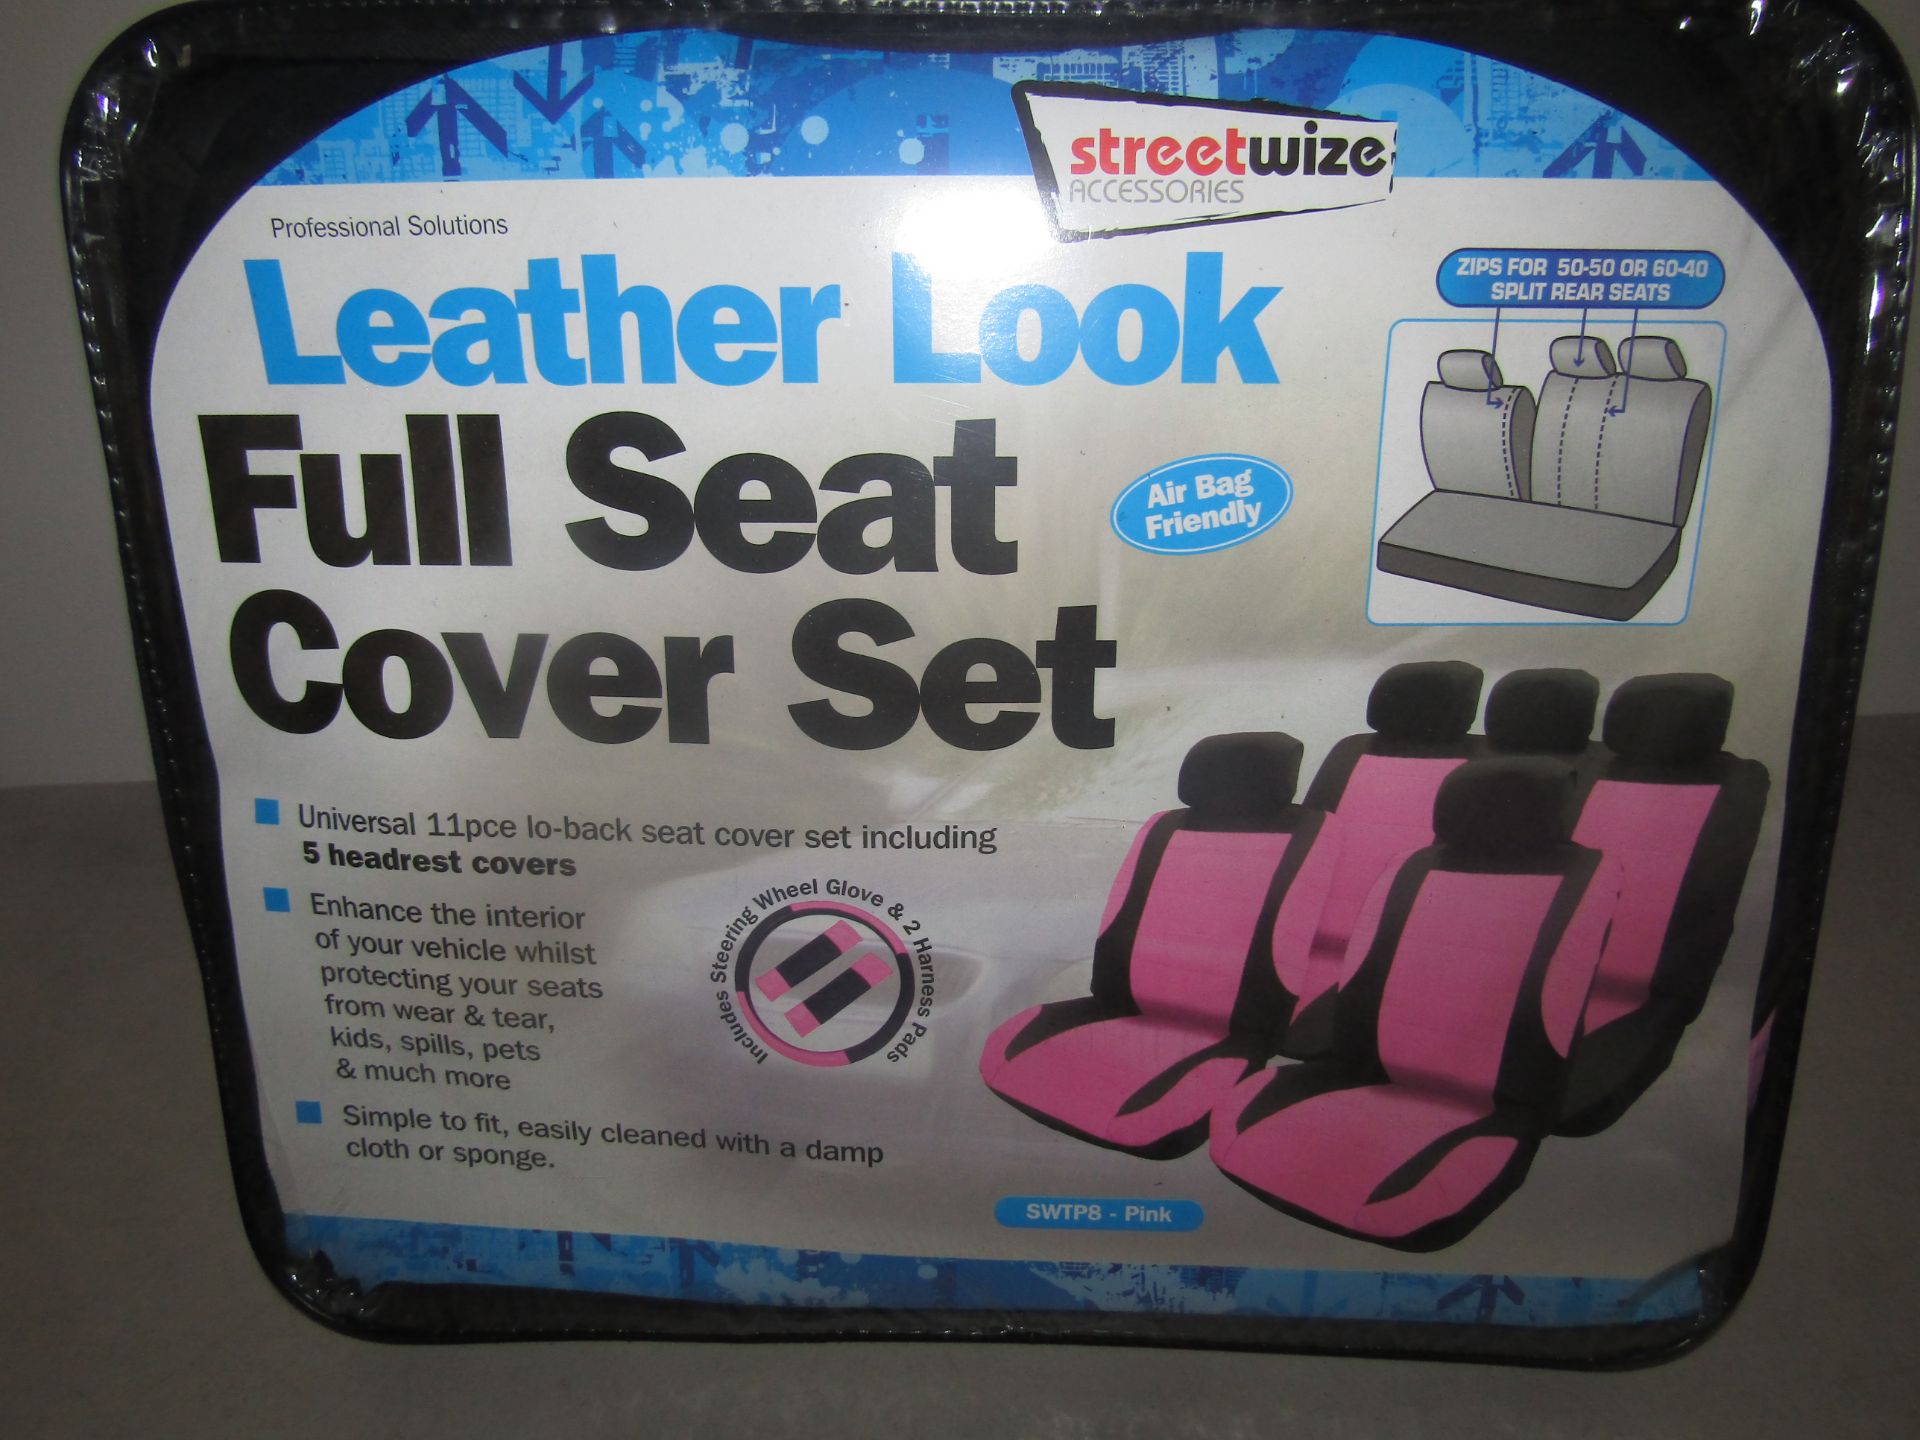 Leather look full seat cover set, pink colour, unused in carry case.